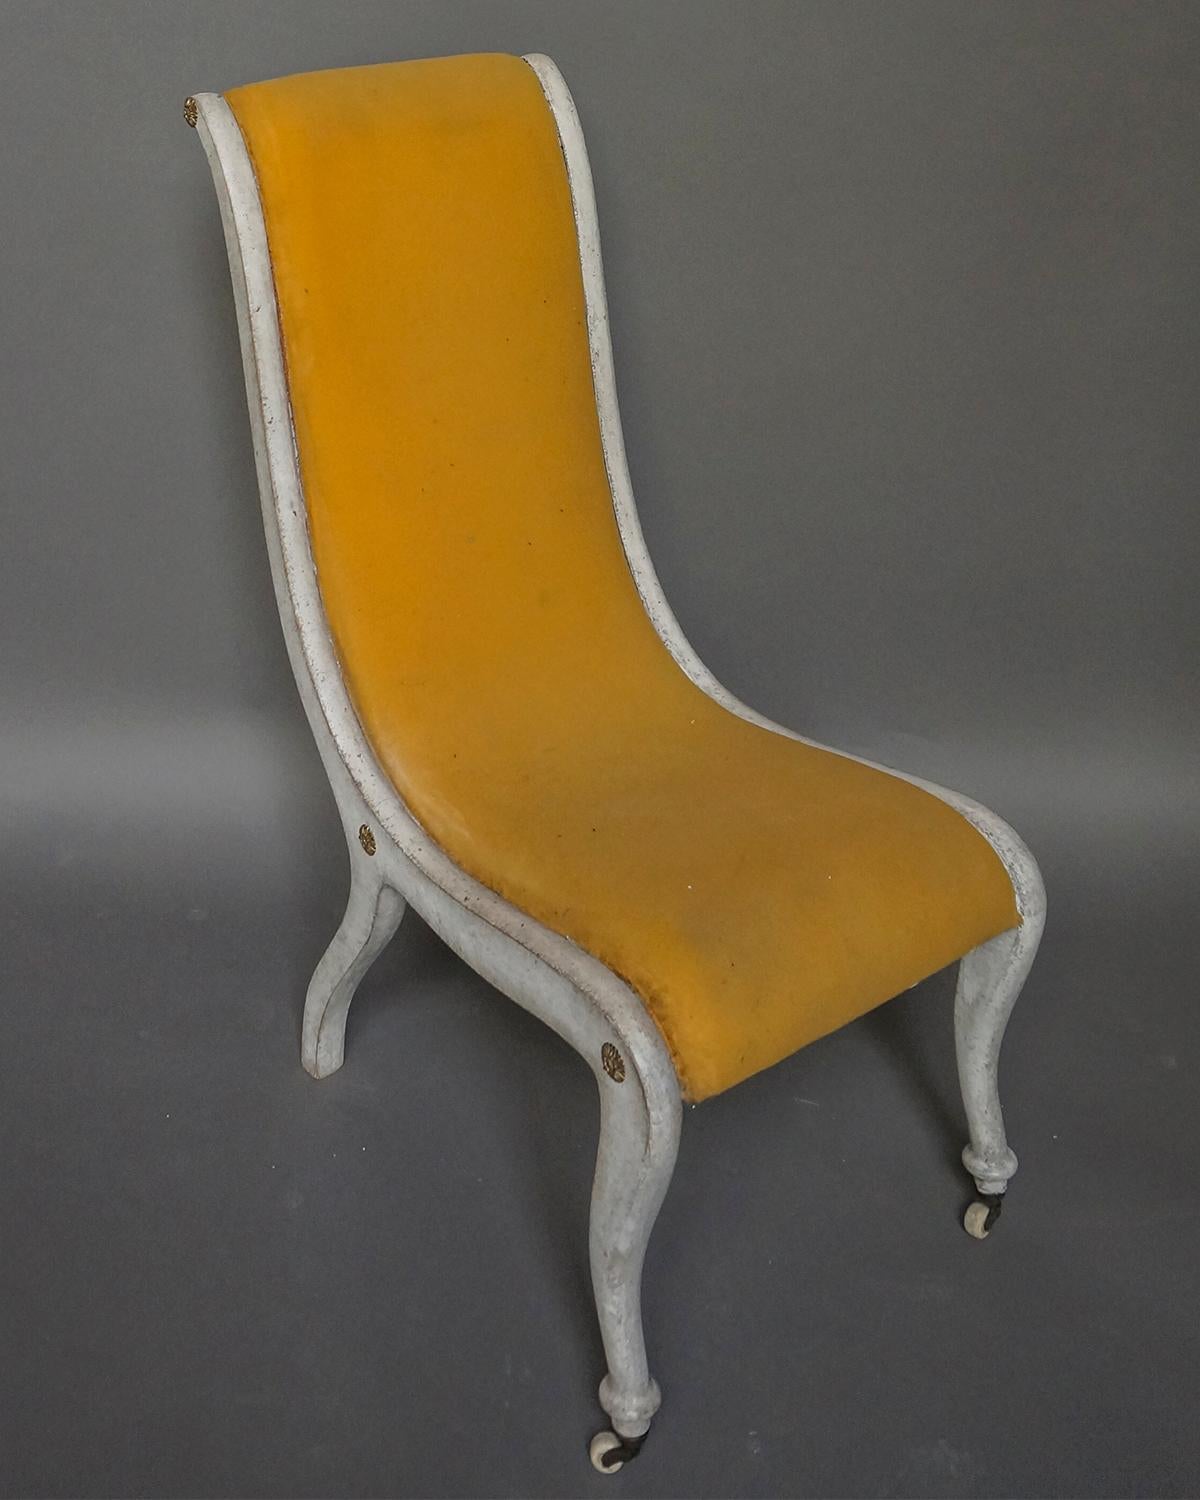 An unusual pair of Biedermeier slipper chairs, Sweden circa 1830, with curved form and original brass fittings. Extremely comfortable.